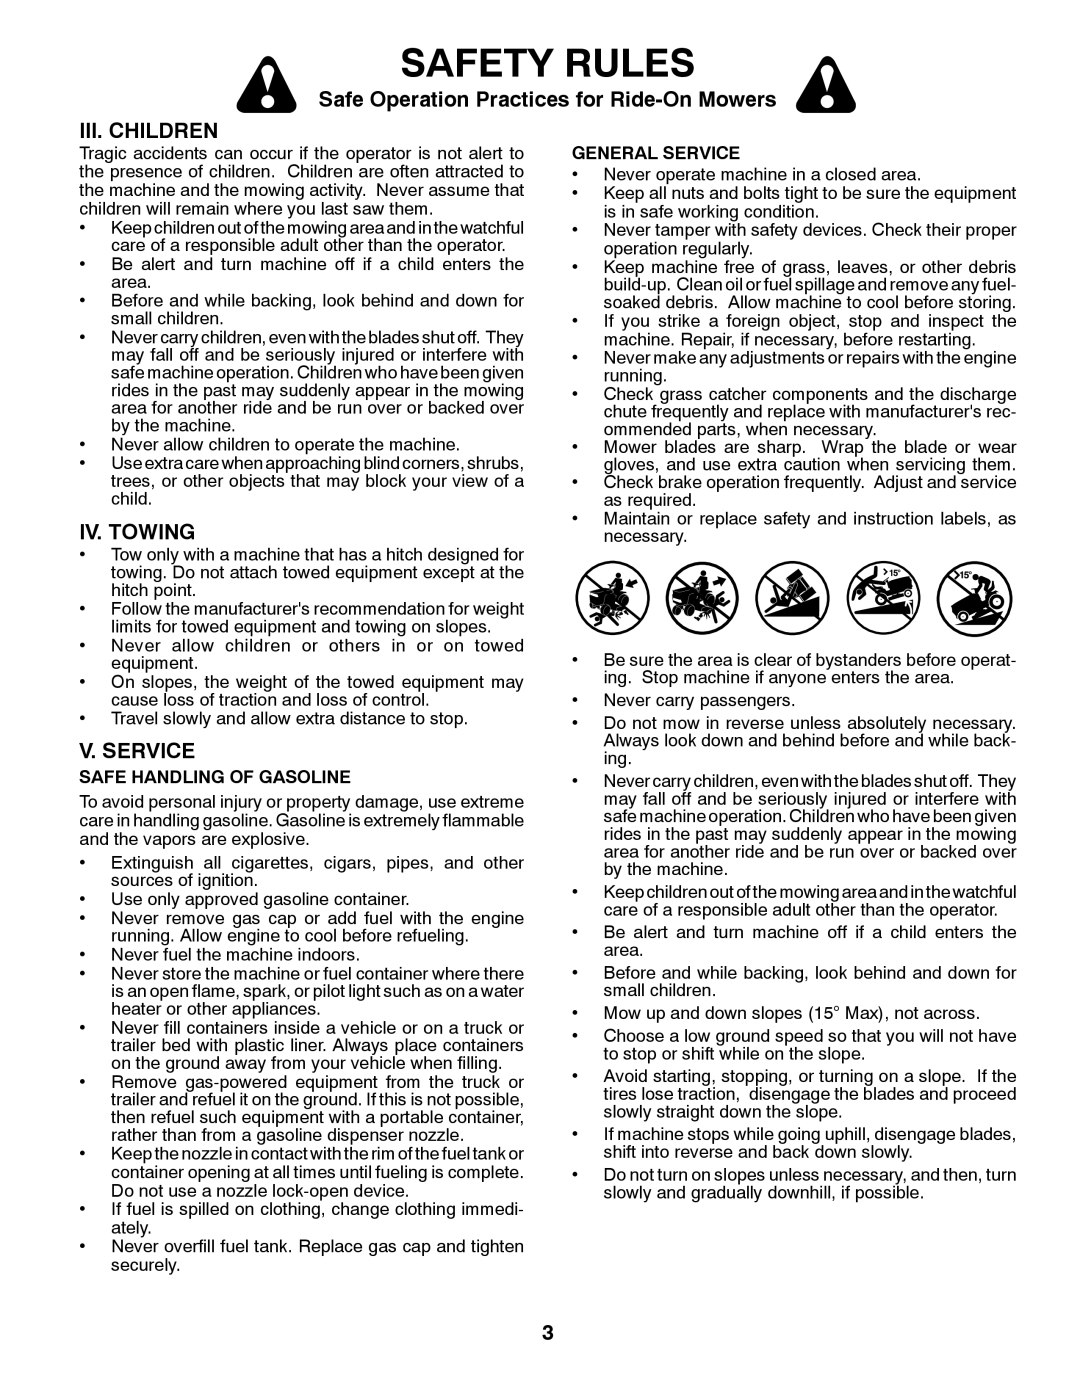 Husqvarna 532 43 95-58 Iii. Children, Iv. Towing, V. Service, Safety Rules, Safe Operation Practices for Ride-On Mowers 